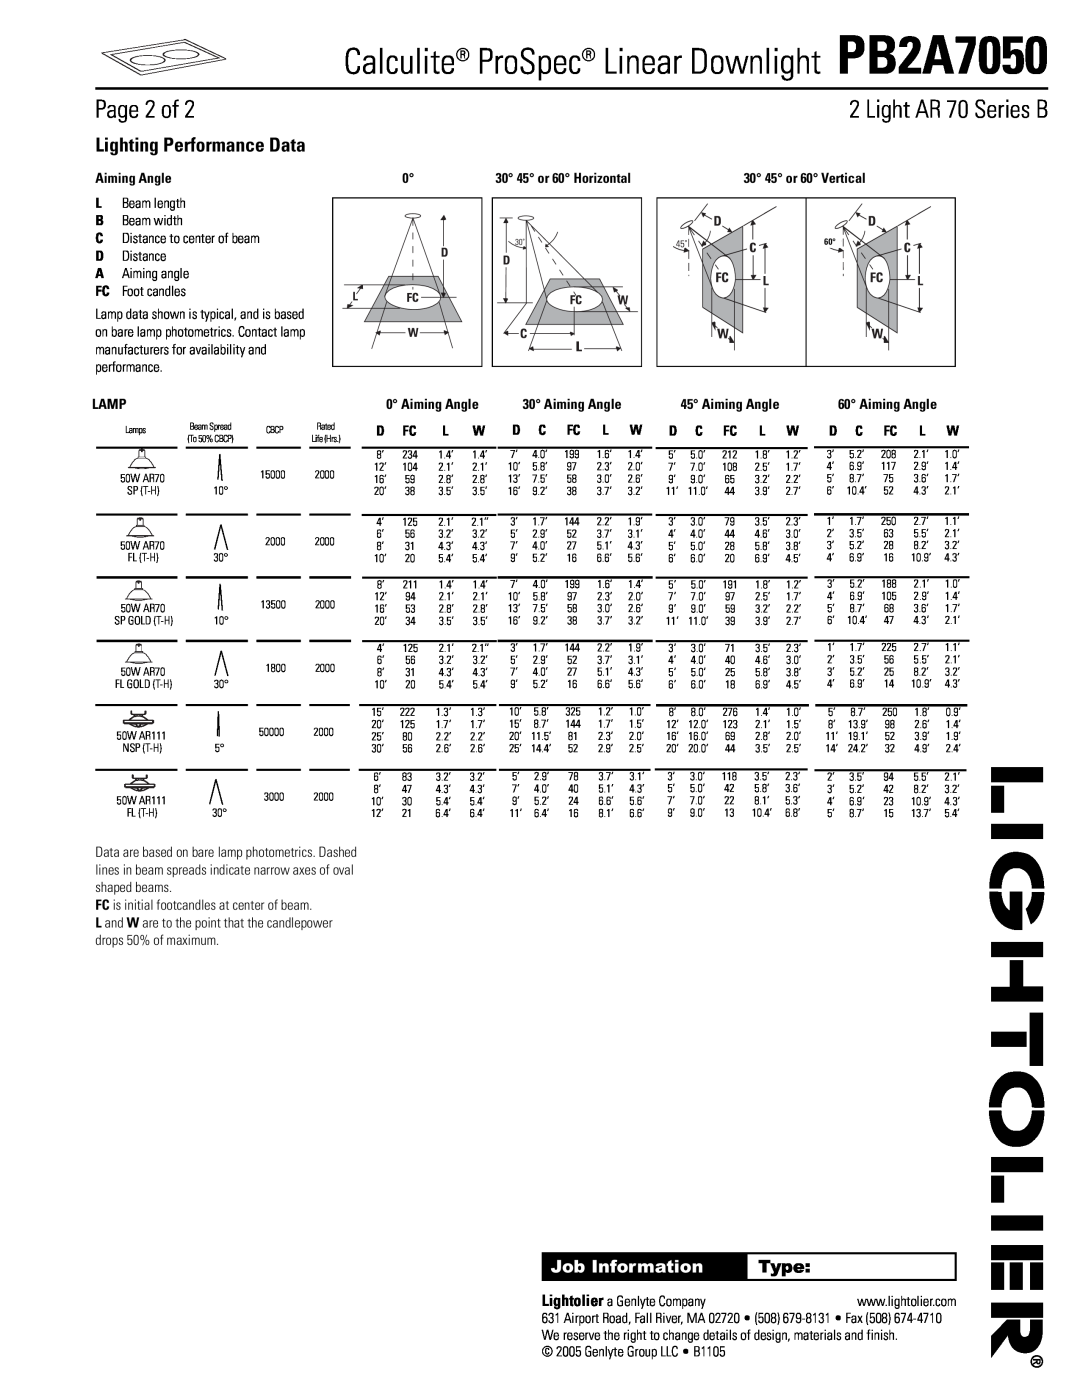 Lightolier PB2A7050 Page 2 of, Lighting Performance Data, Aiming Angle, 30 45 or 60 Vertical, Lamp, D Fc, D C Fc L W, Type 